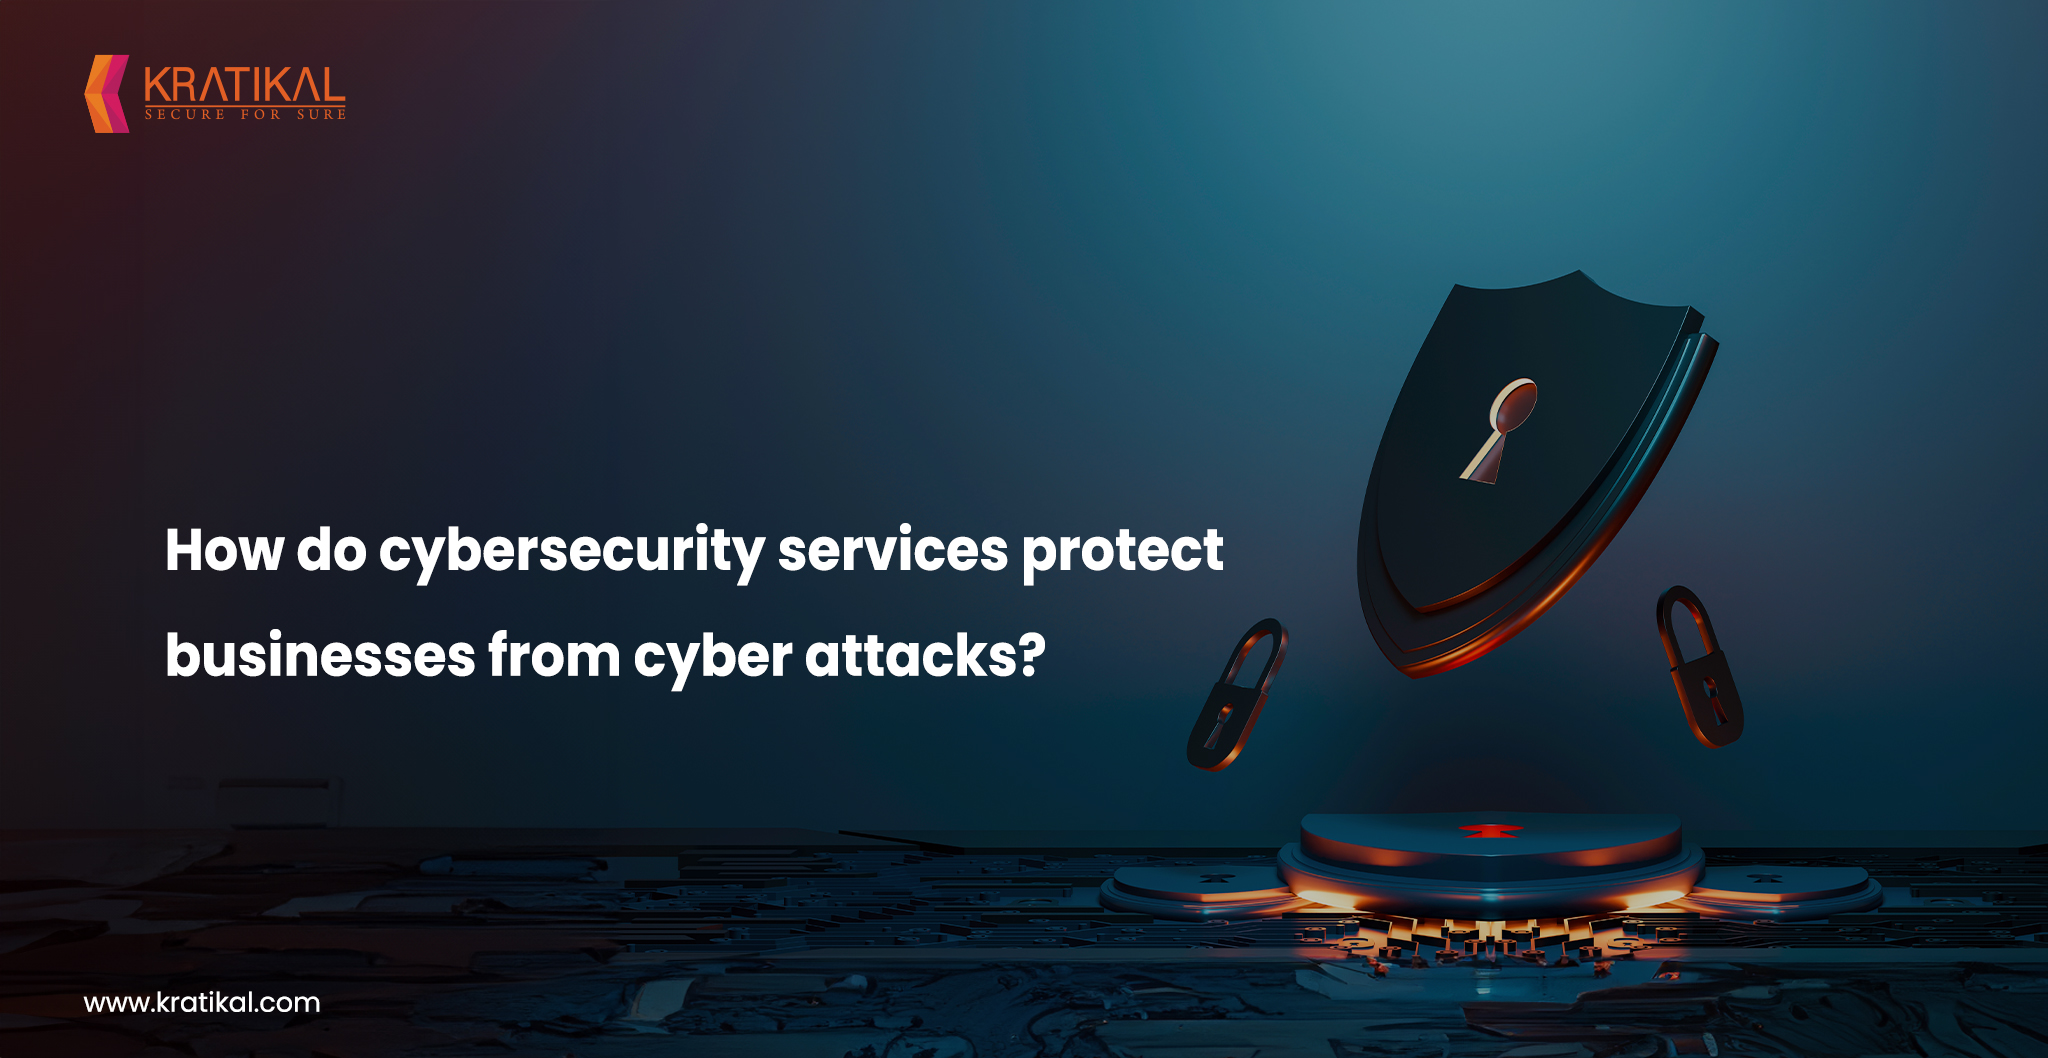 How Does Cybersecurity Services Prevent Businesses From Cyber Attacks?